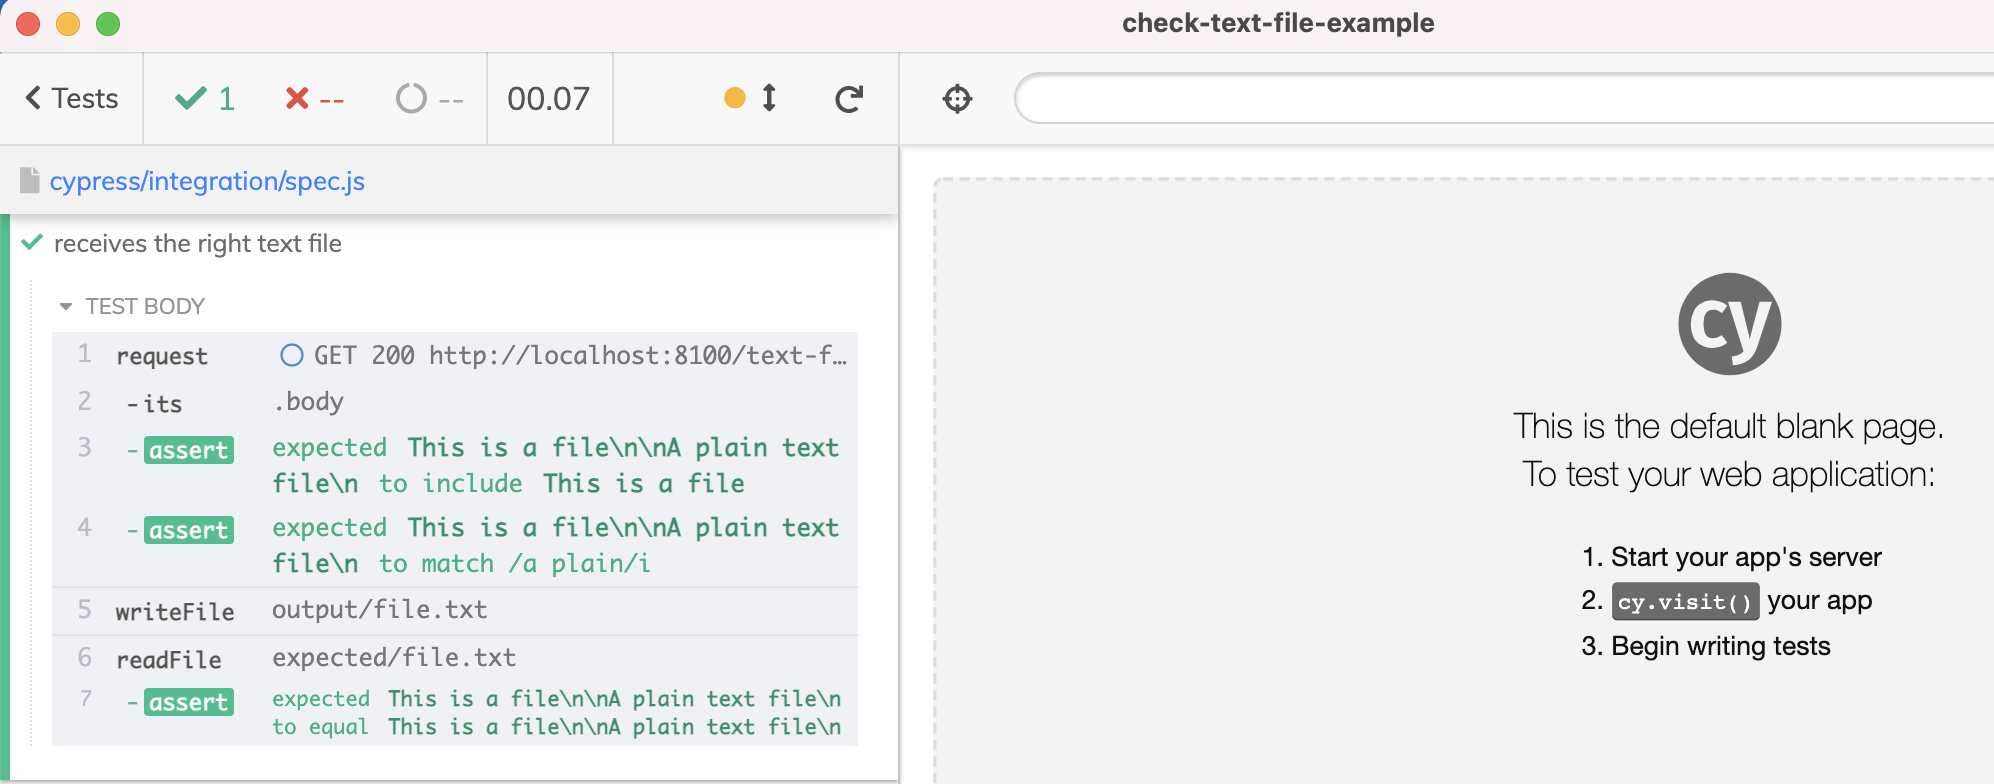 Checking the text using assertions